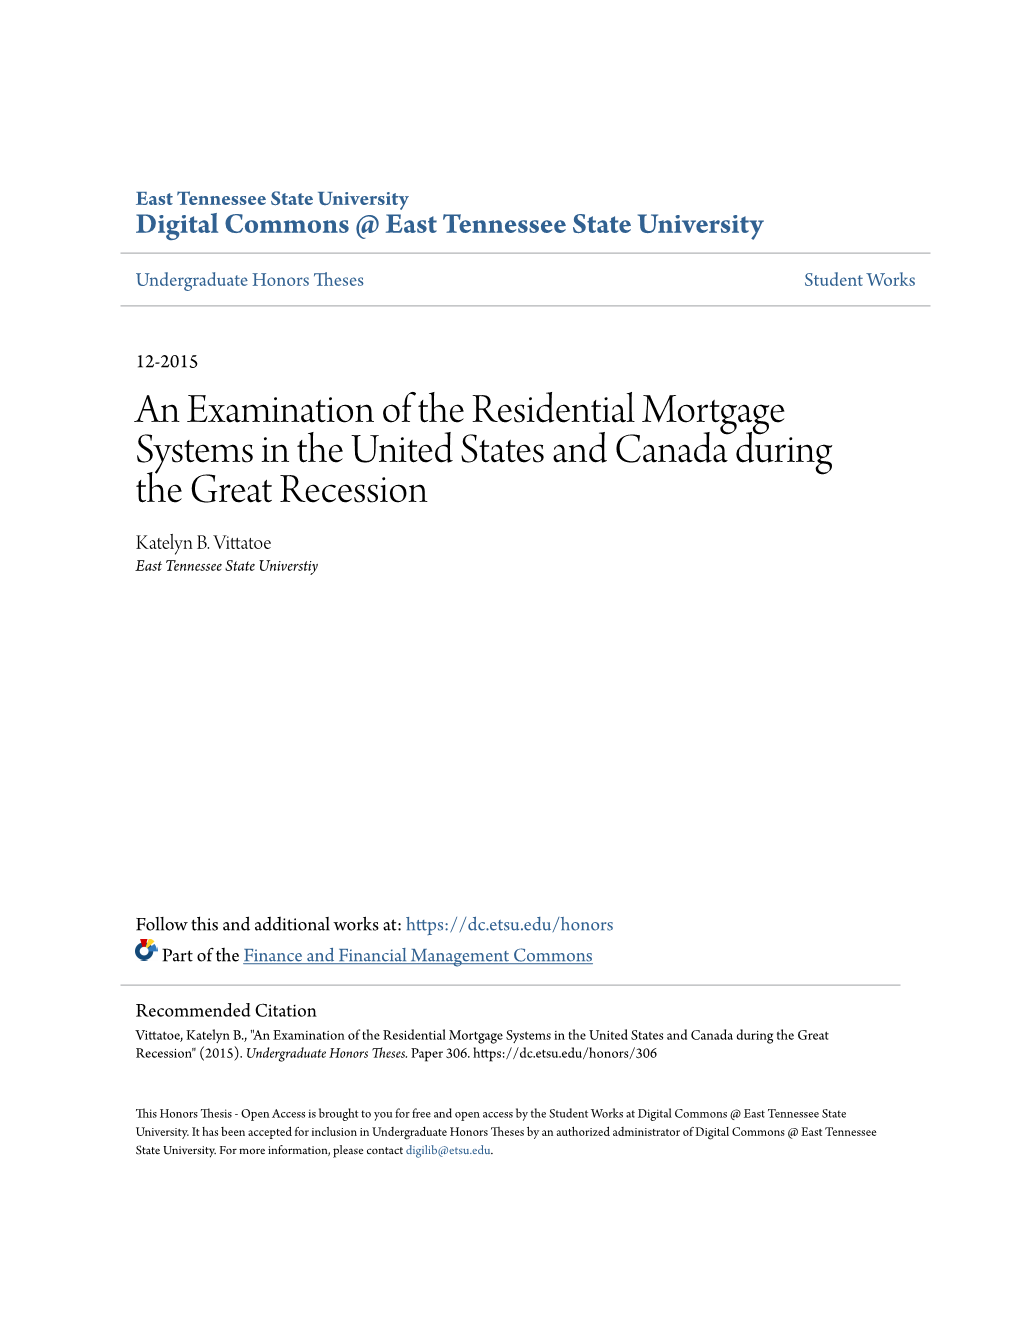 An Examination of the Residential Mortgage Systems in the United States and Canada During the Great Recession Katelyn B